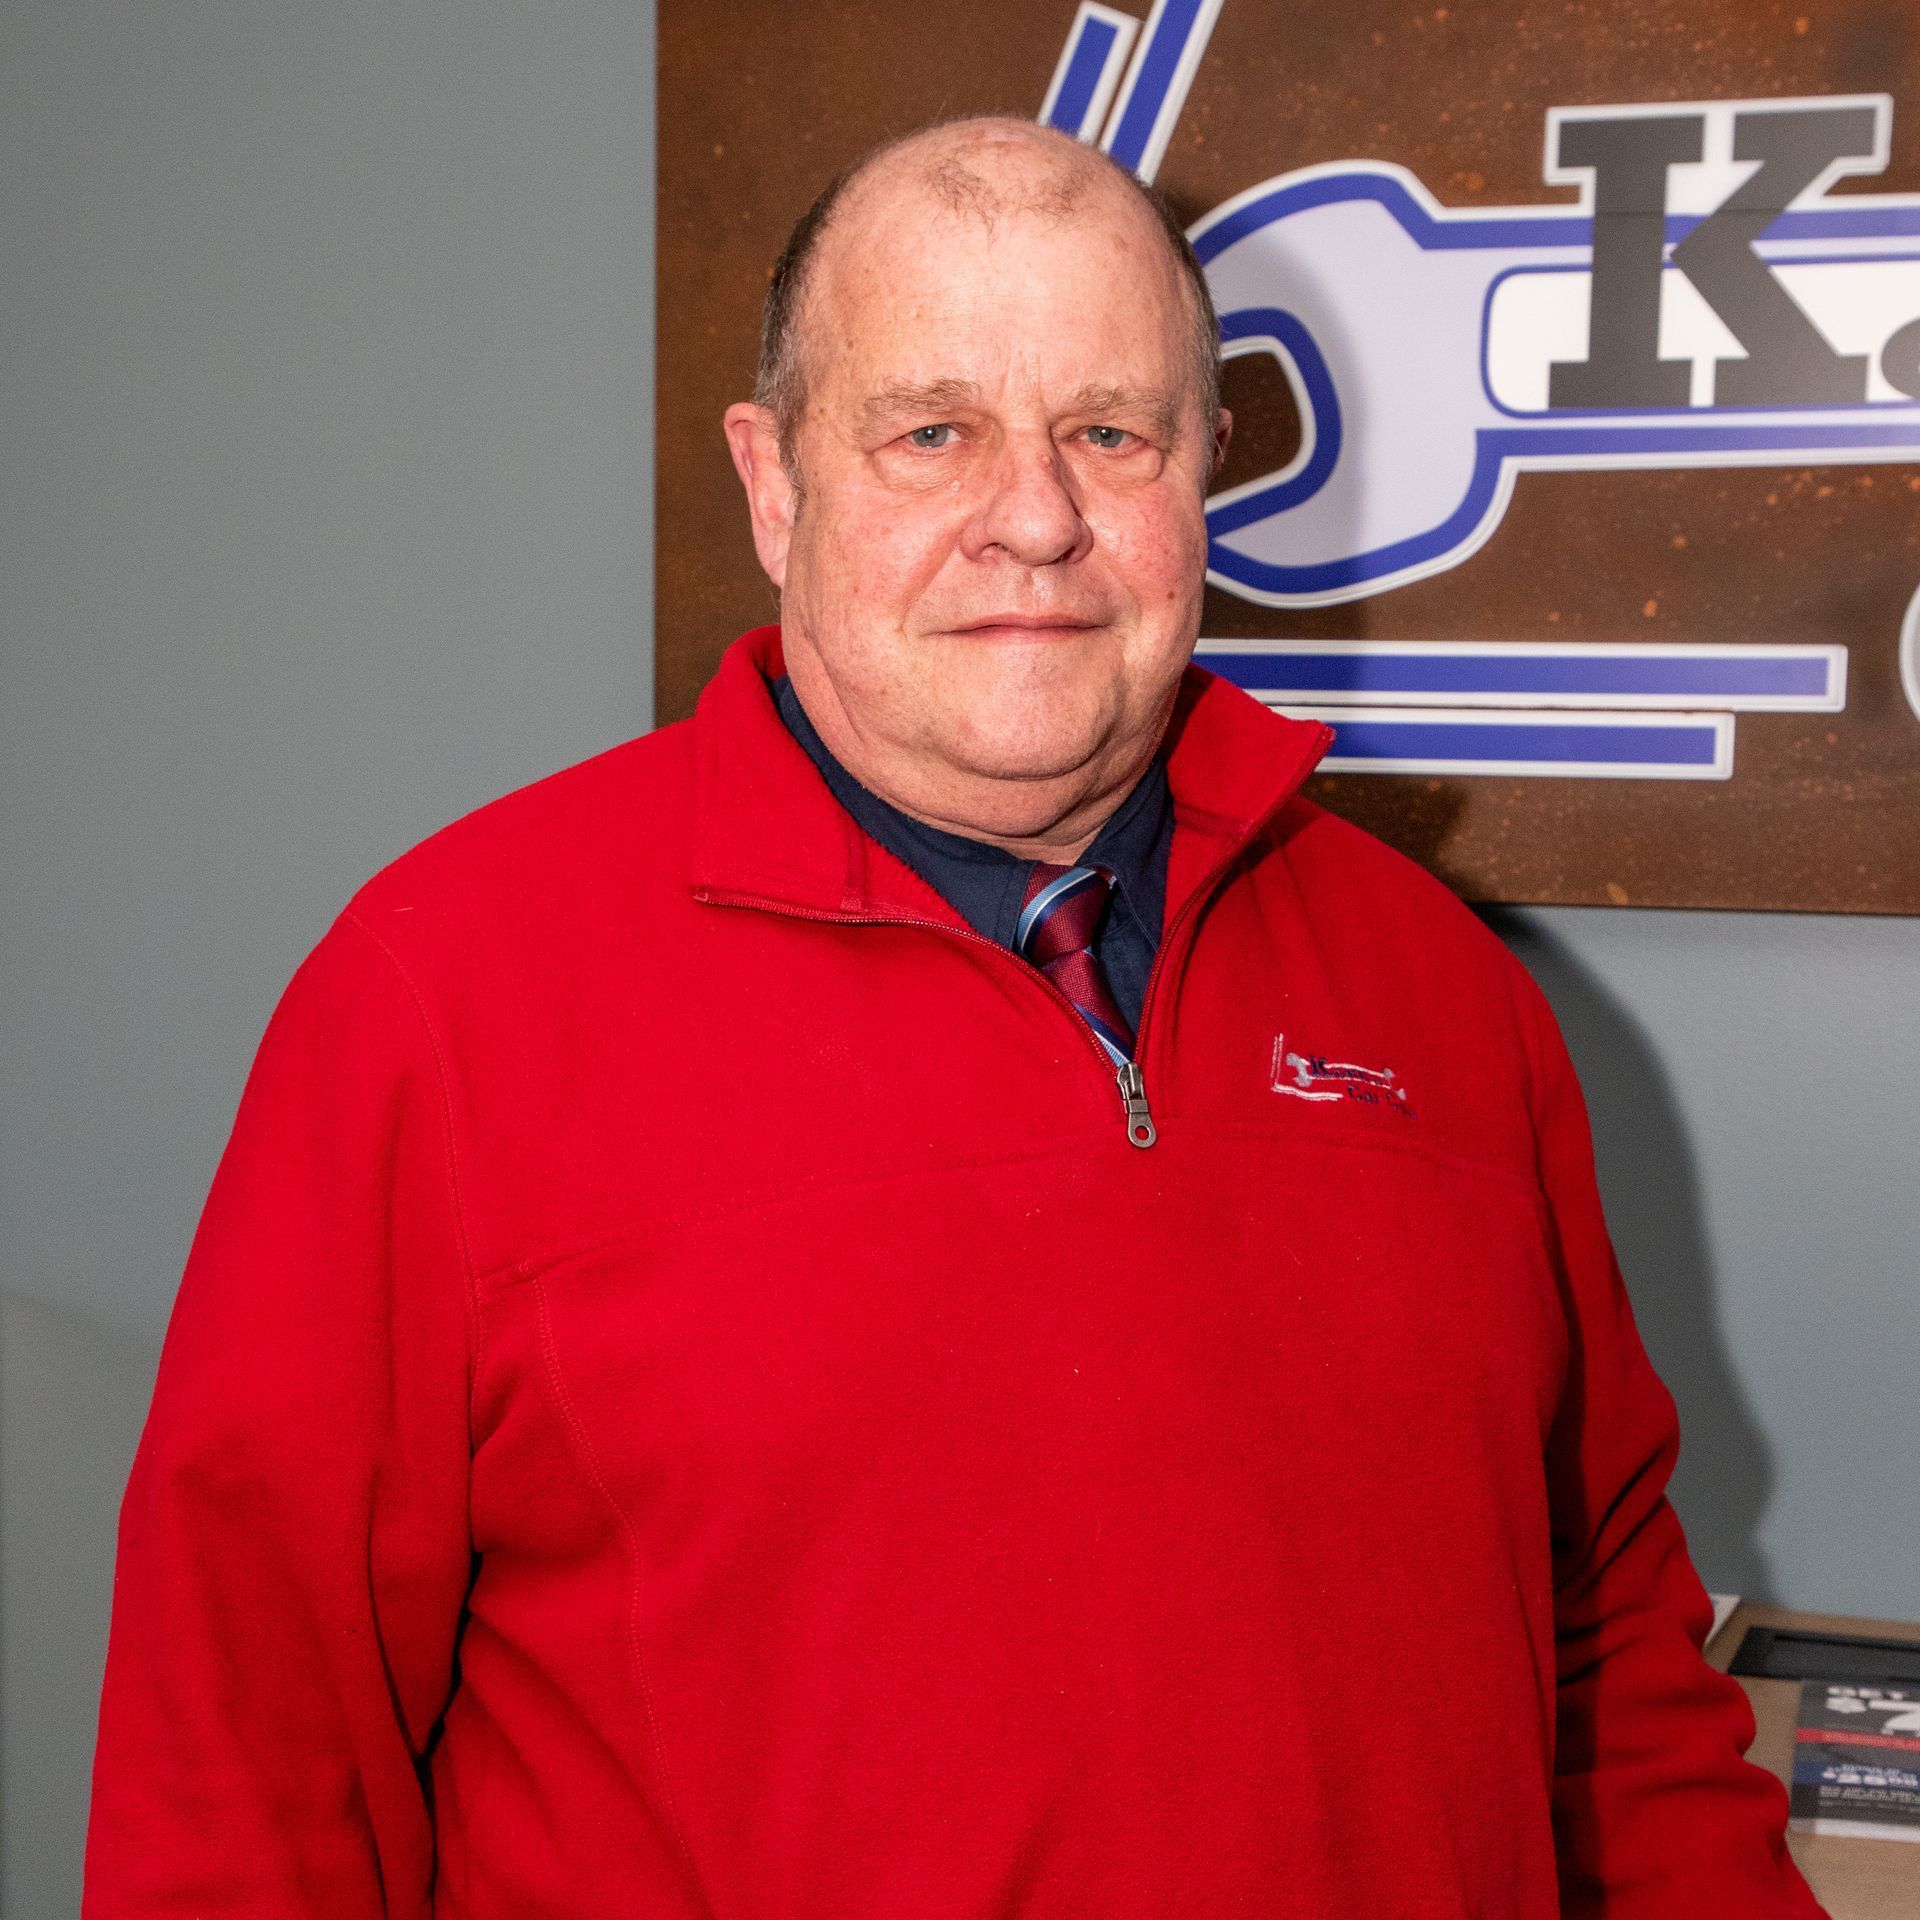 Keith Wolff, owner of Keith's Car Care in Oswego, IL